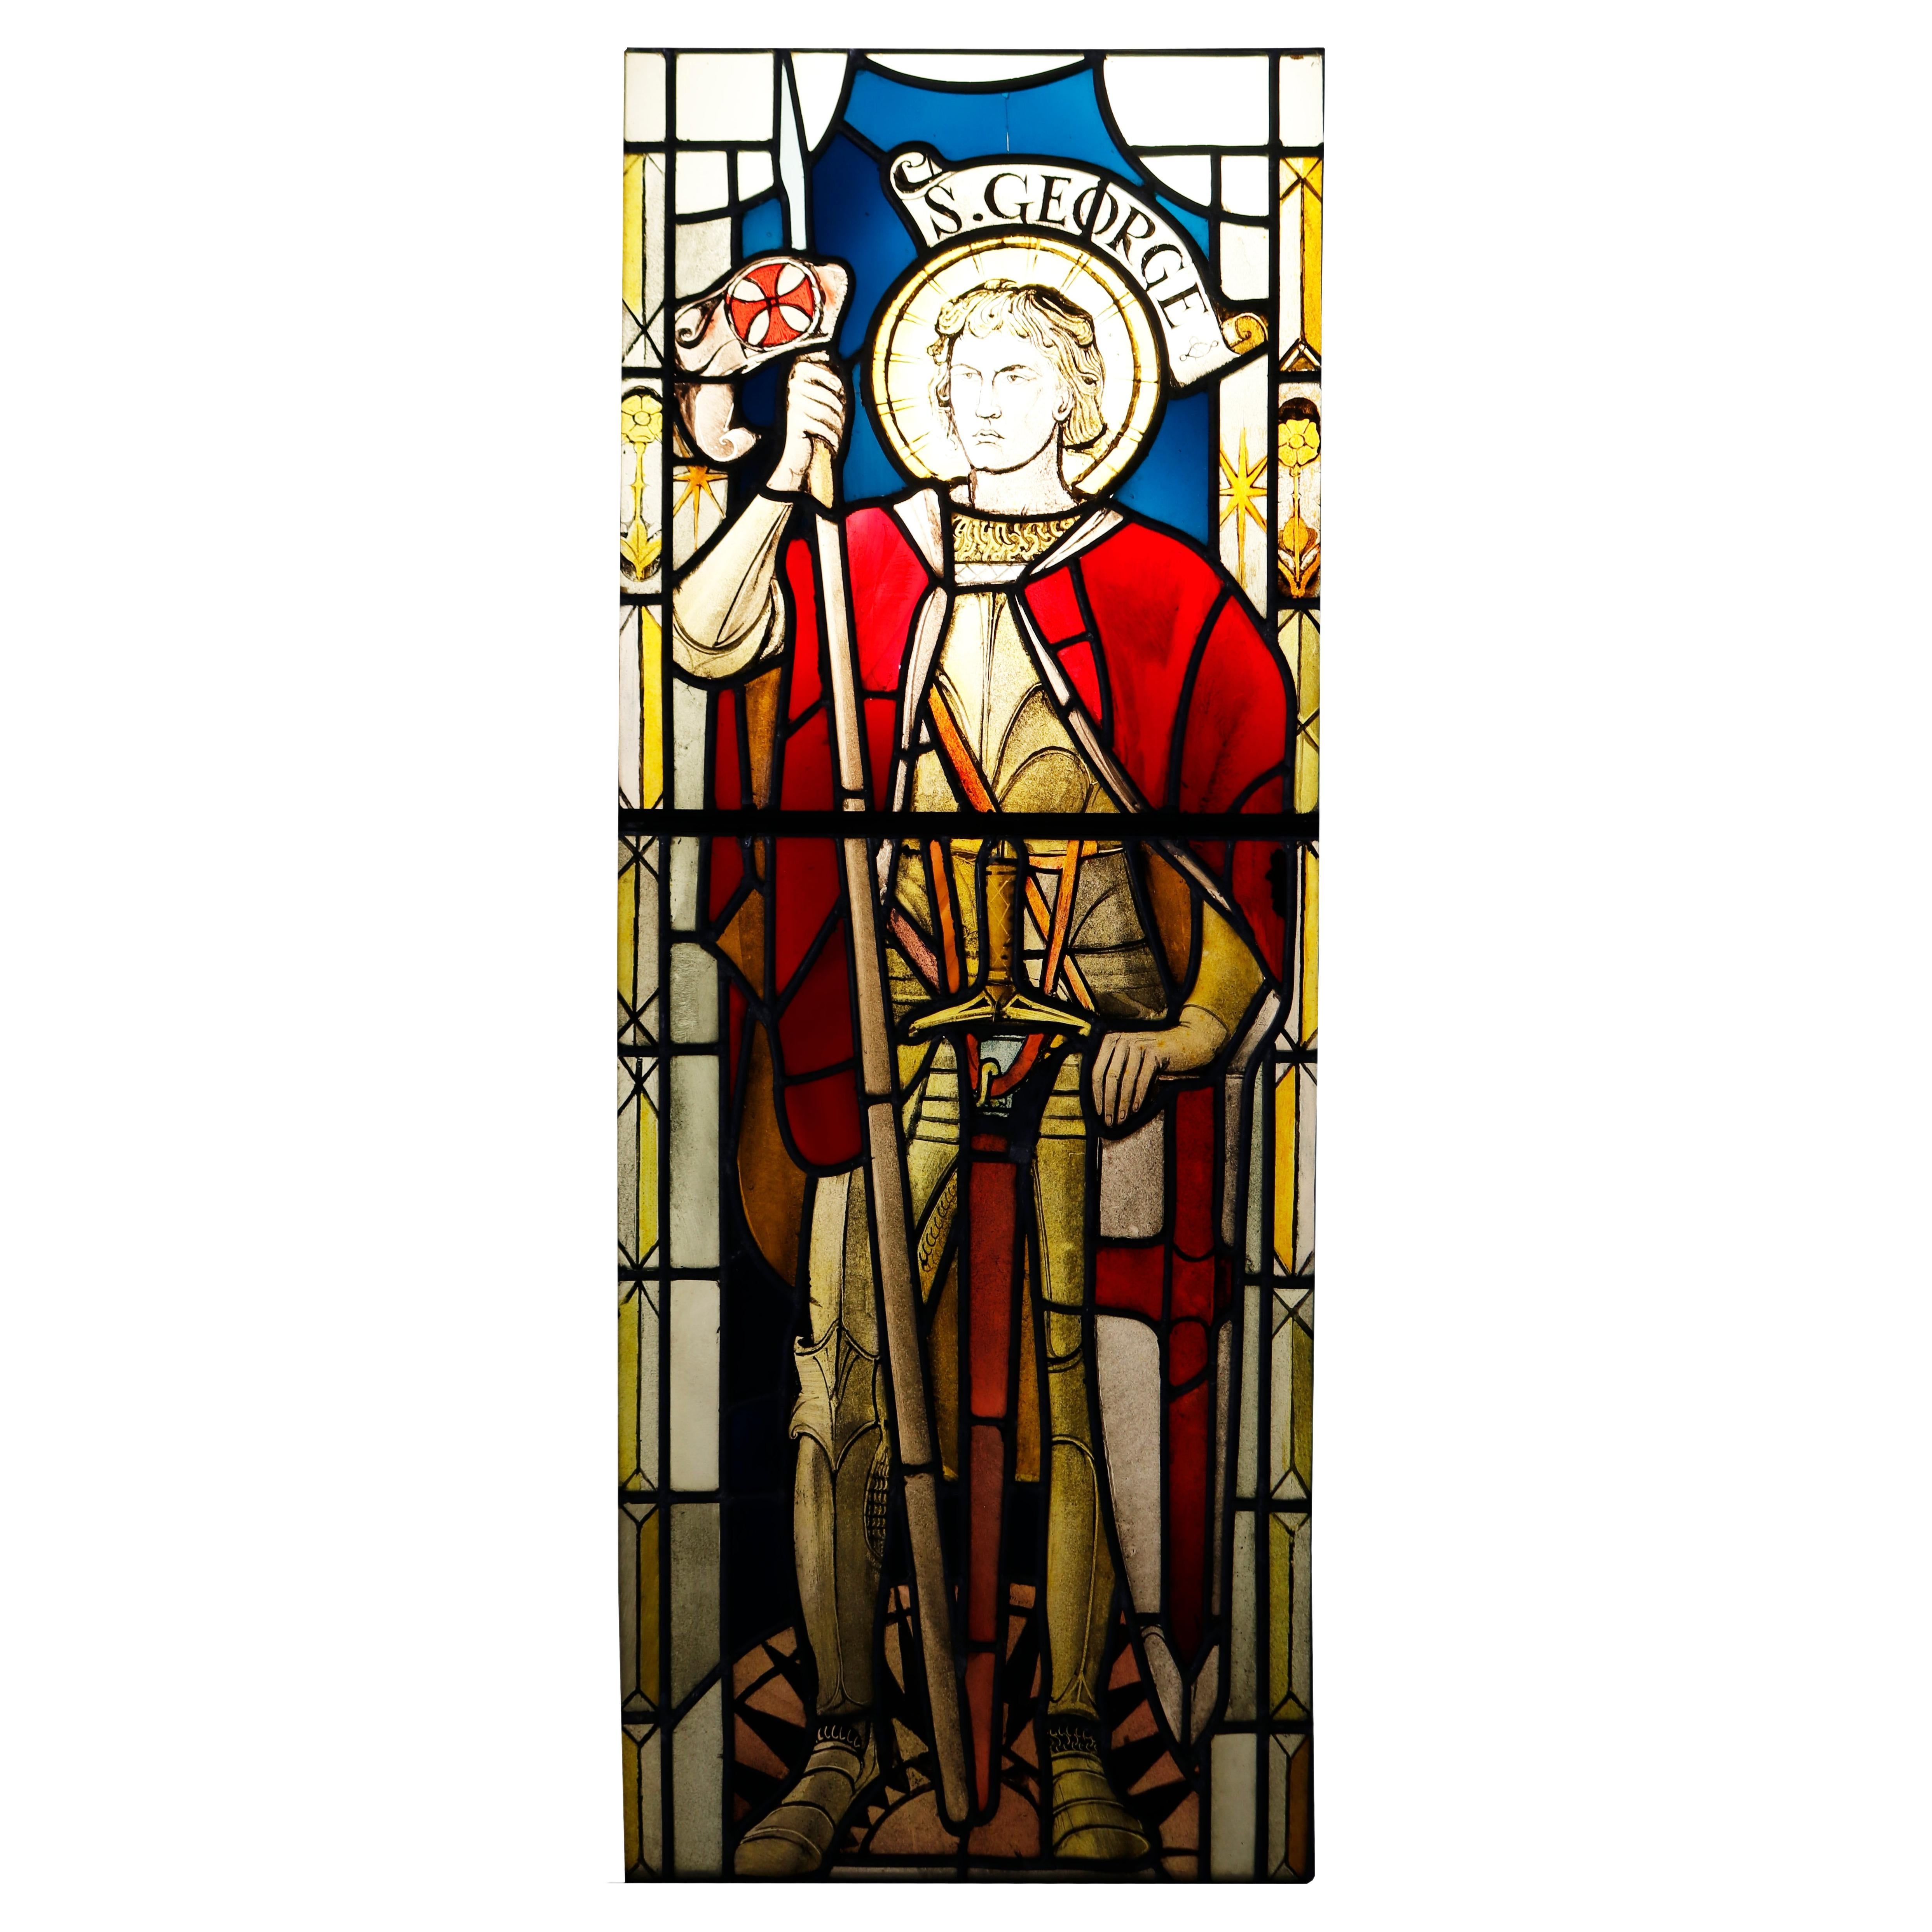 Antique Stained Glass Window of St George